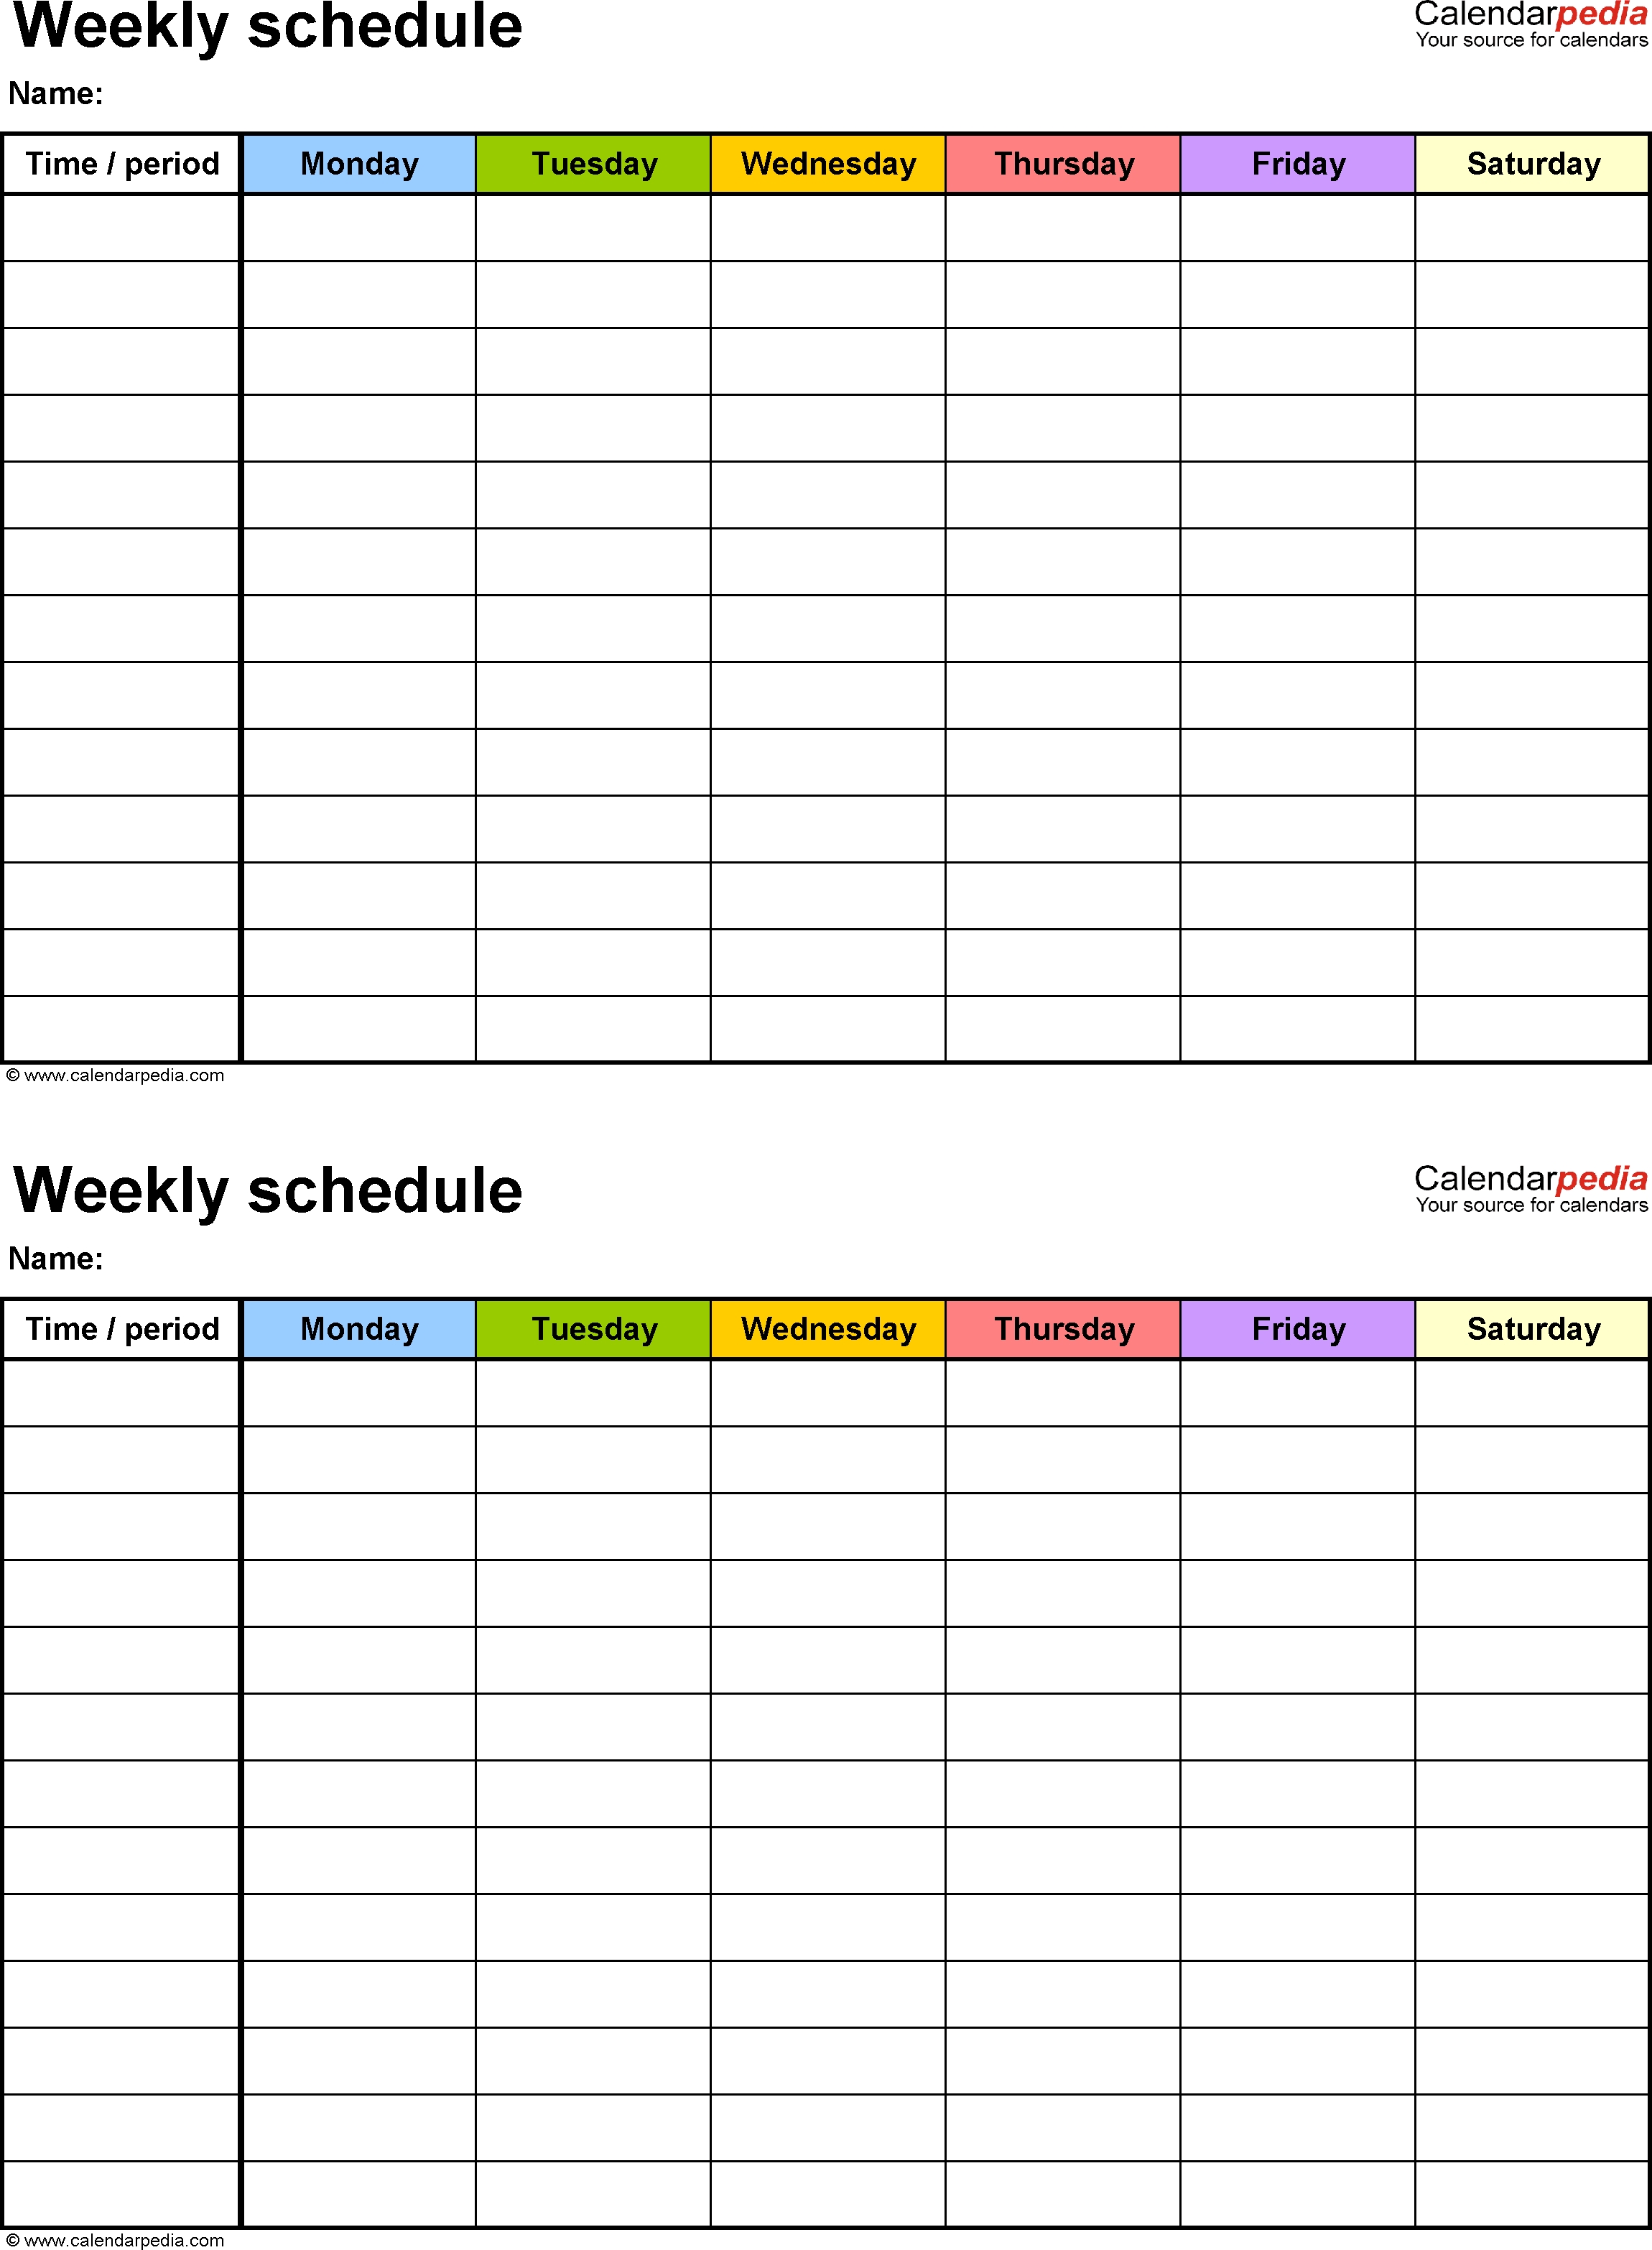 Free Weekly Schedule Templates For Word - 18 Templates with regard to 7 Day Calendar Template Printable